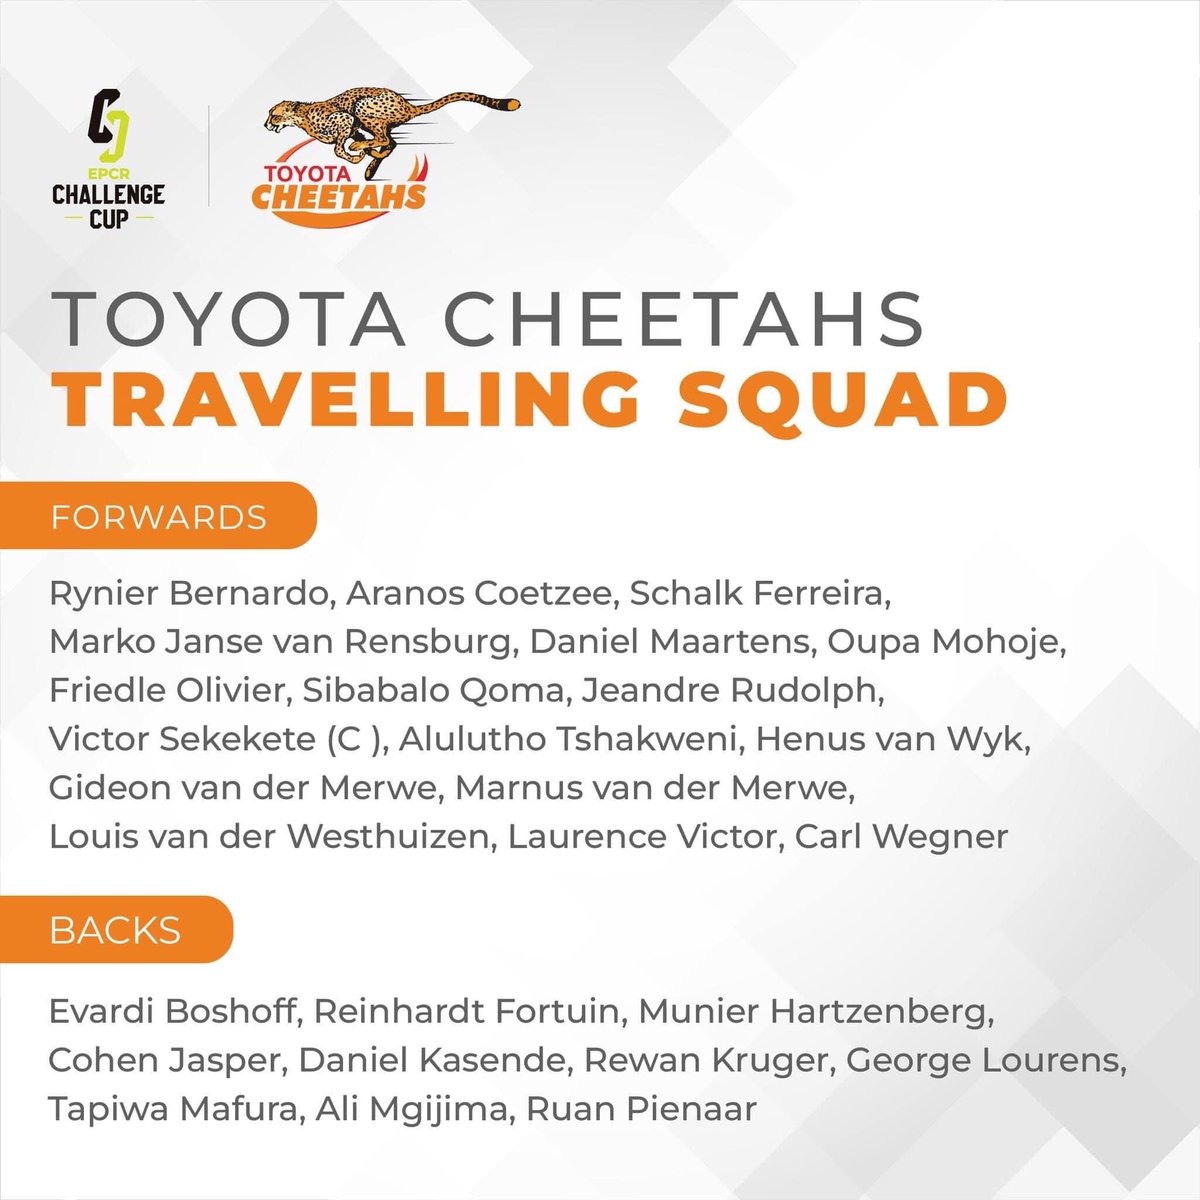 Toyota Cheetahs' travelling squad for their Round 4 of Pool 1 of the 2023/24 EPCR Challenge Cup against Section Paloise Béarn Pyrénées on Sunday. 💪🏻 🐆

#EPCRChallengeCup
#GlobalSportsNews        

©️ The Cheetahs